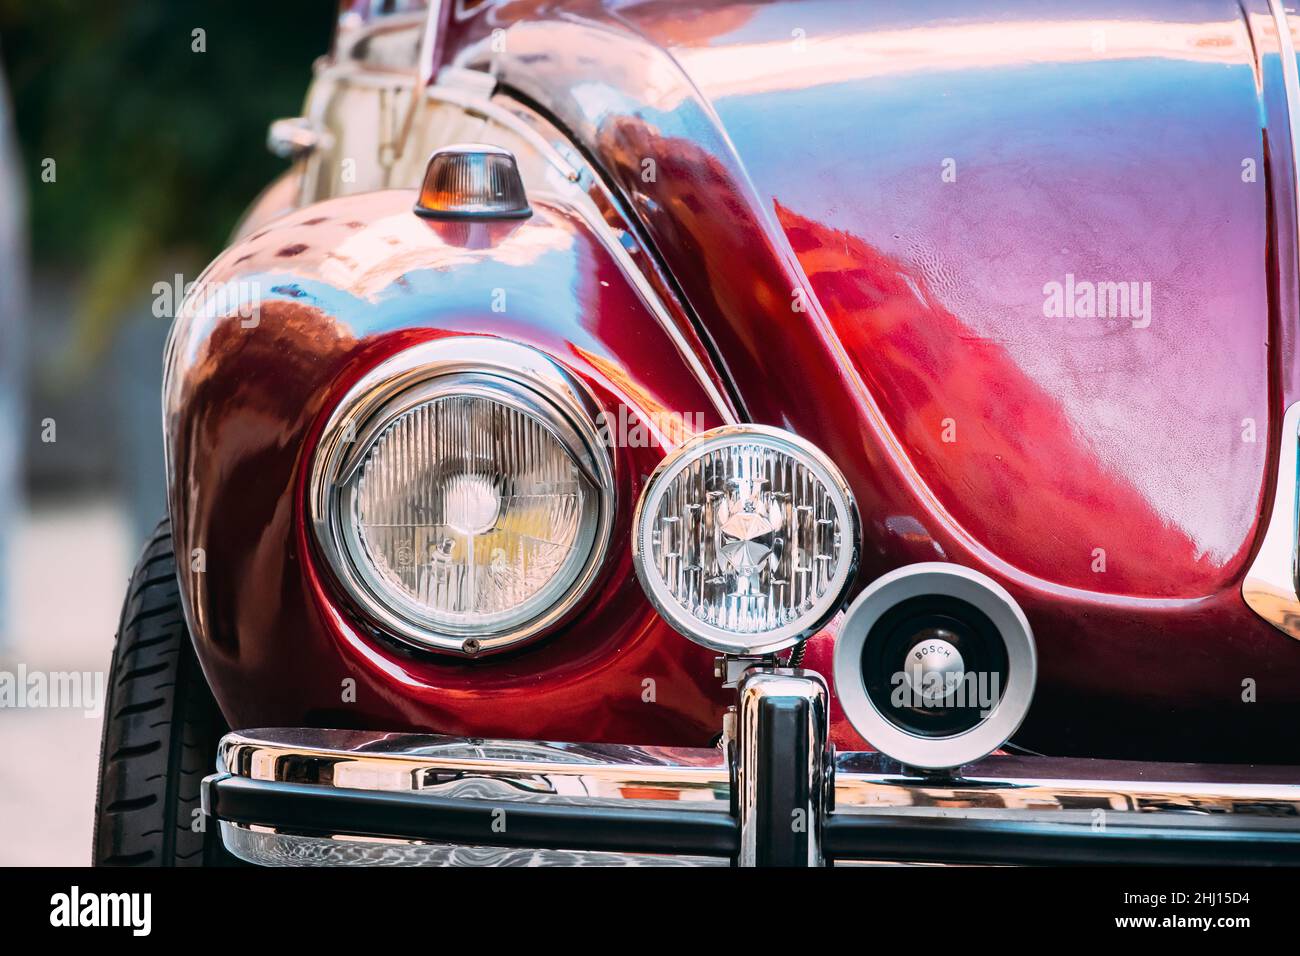 Rome, Italy. Close Up Headlight Of Old Retro Vintage Red Color Volkswagen Beetle Car Parked At Street Stock Photo